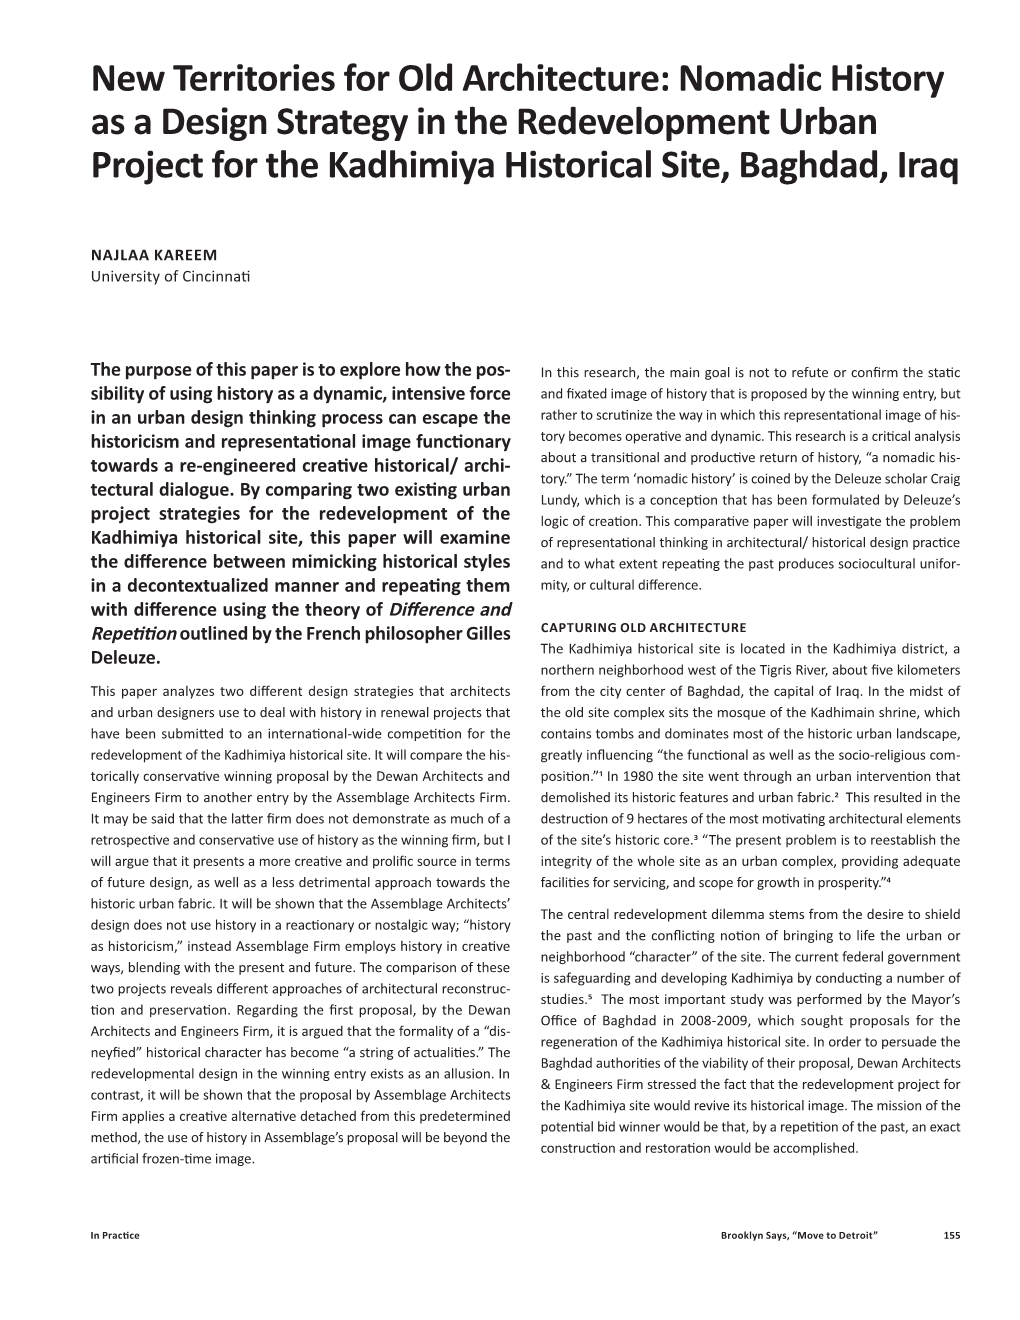 New Territories for Old Architecture: Nomadic History As a Design Strategy in the Redevelopment Urban Project for the Kadhimiya Historical Site, Baghdad, Iraq